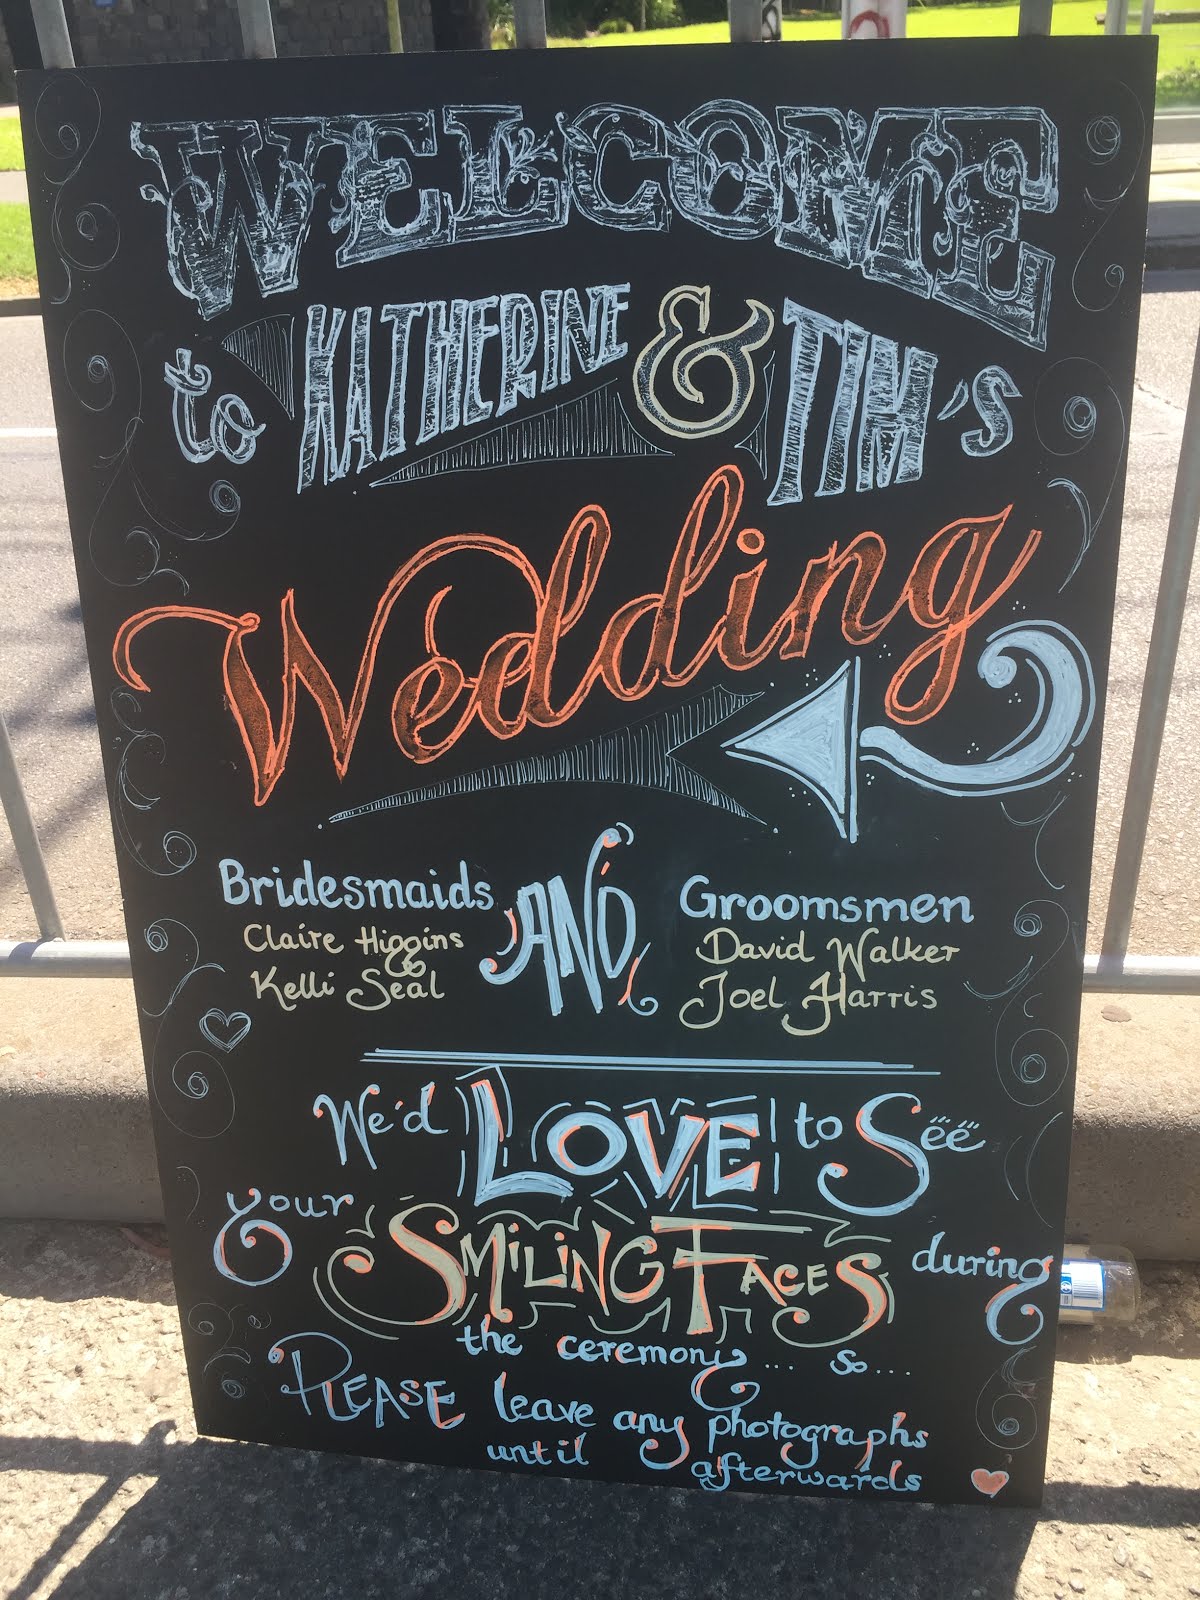 On of my chalkboard signs